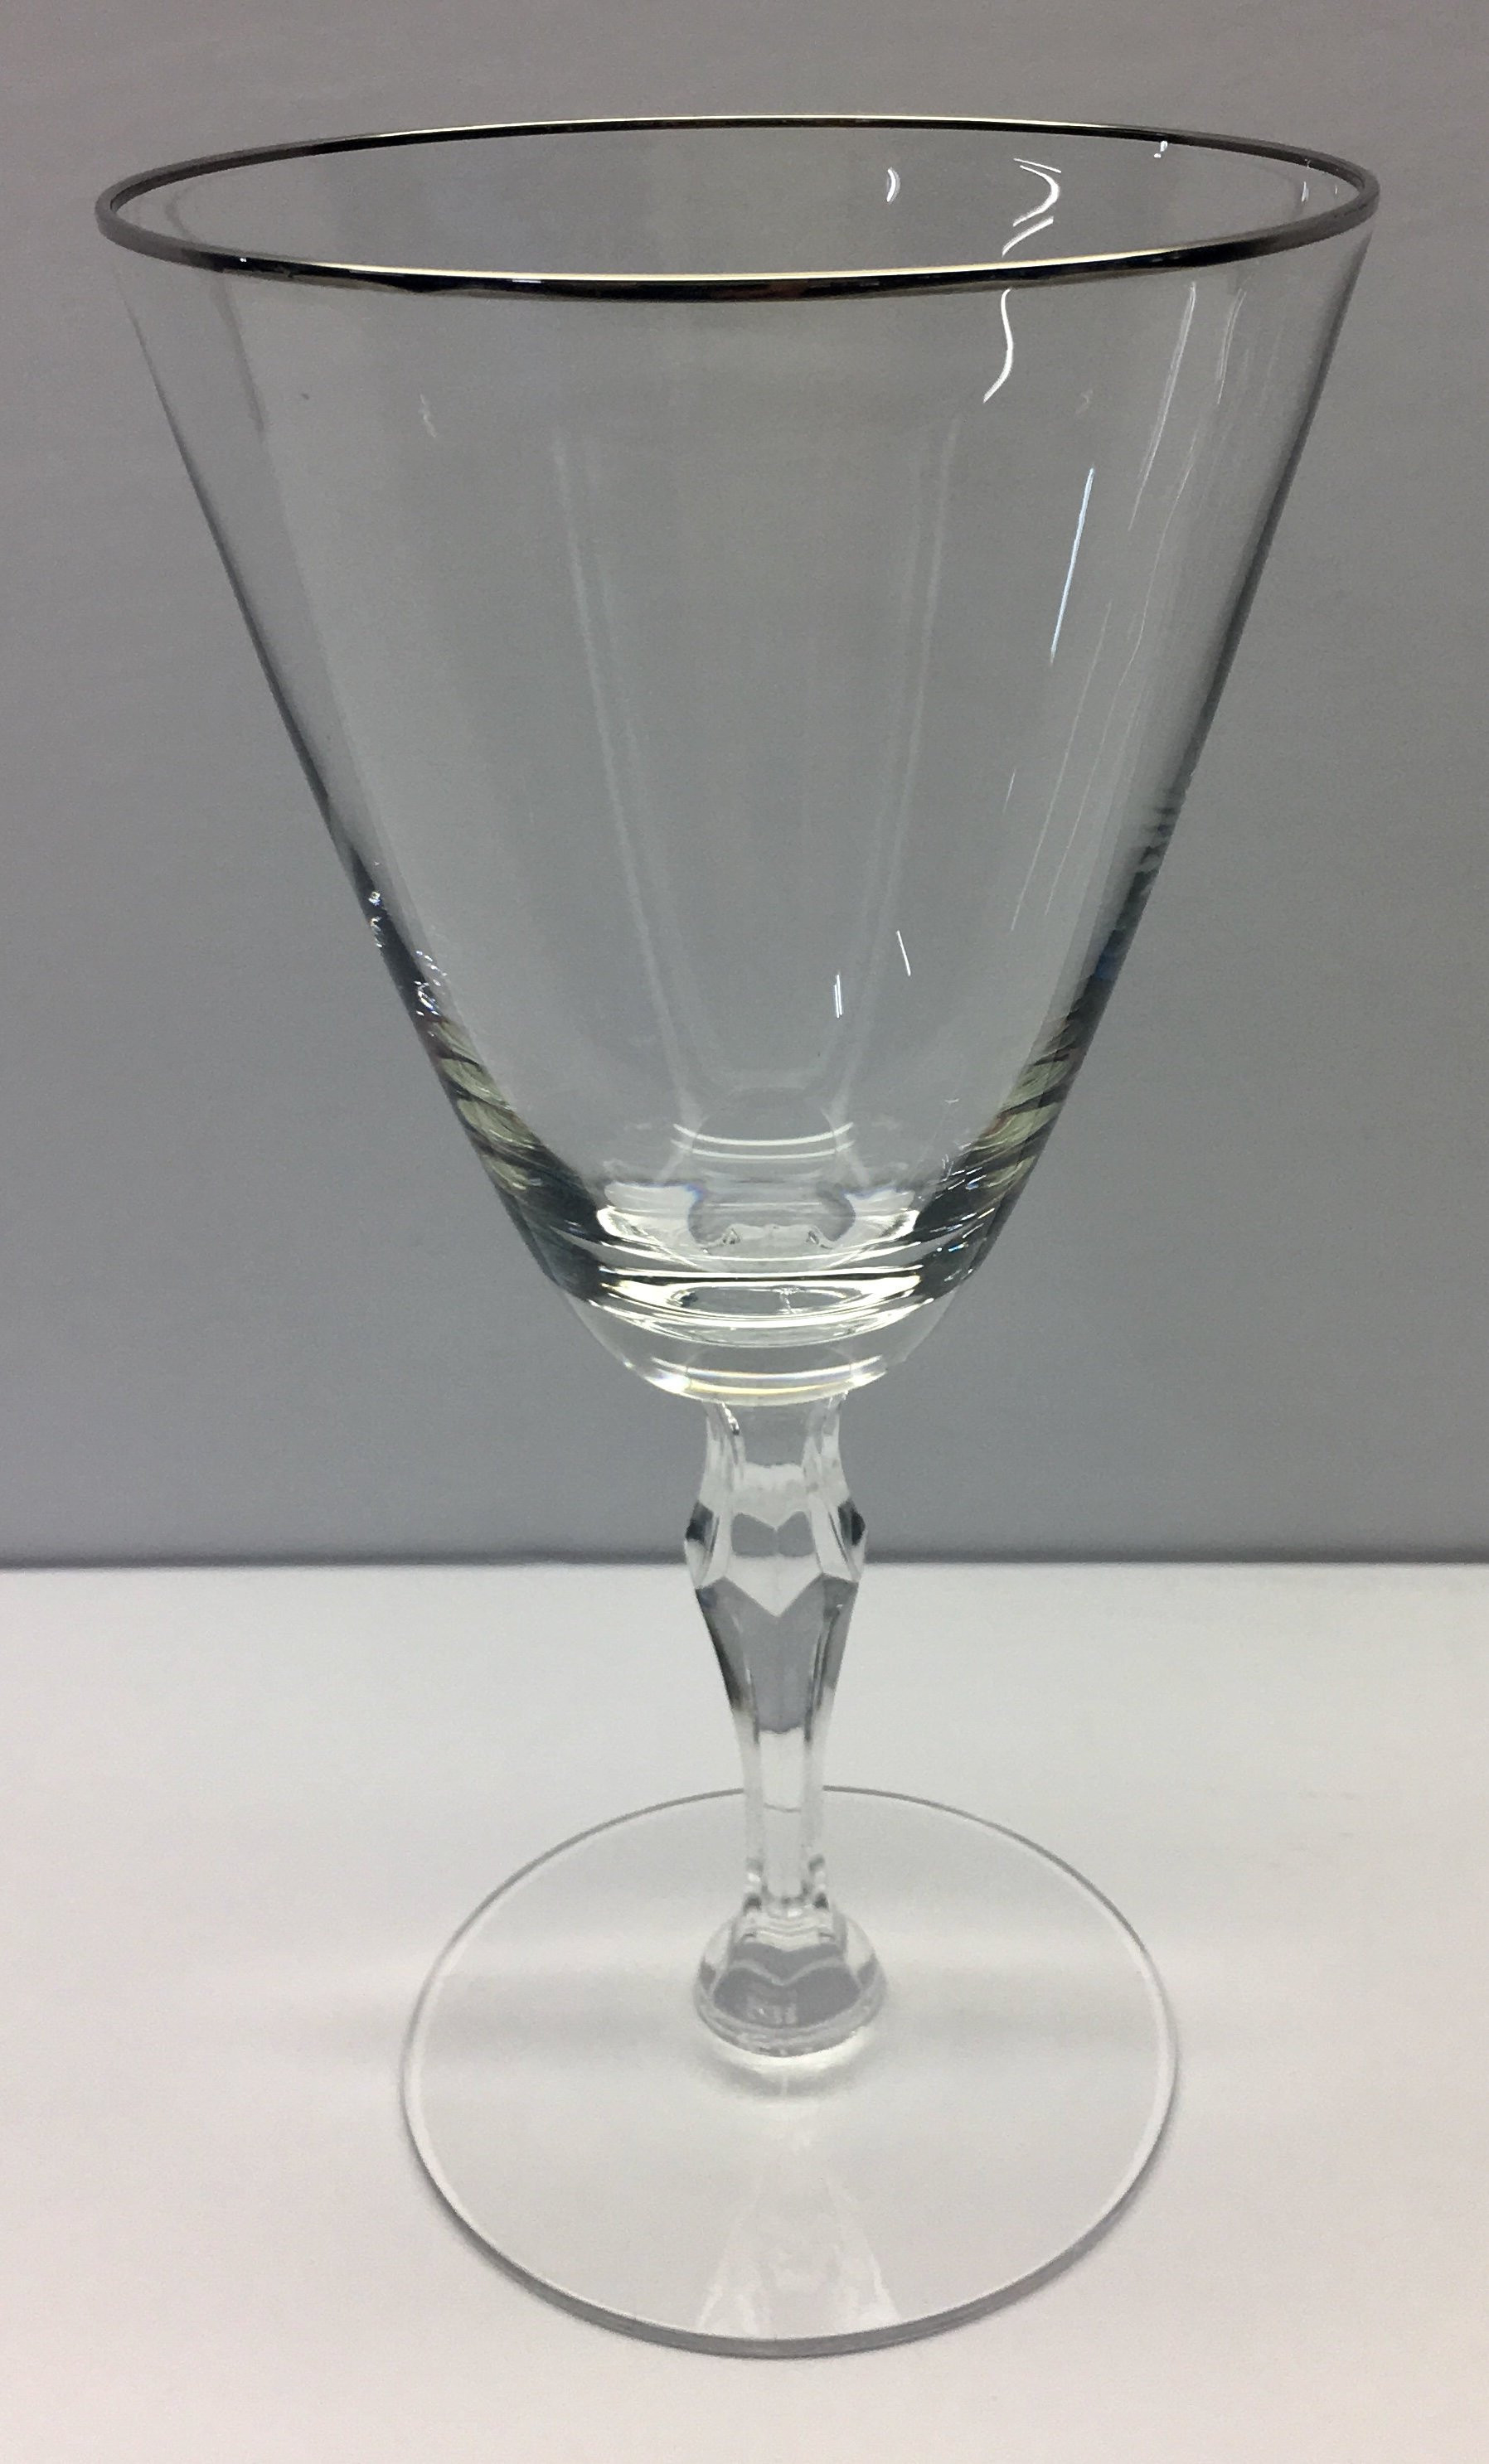 17 attractive noritake Crystal Vase 2024 free download noritake crystal vase of fostoria engagement platinum trim clear glass water etsy intended for dc29fc294c28ezoom